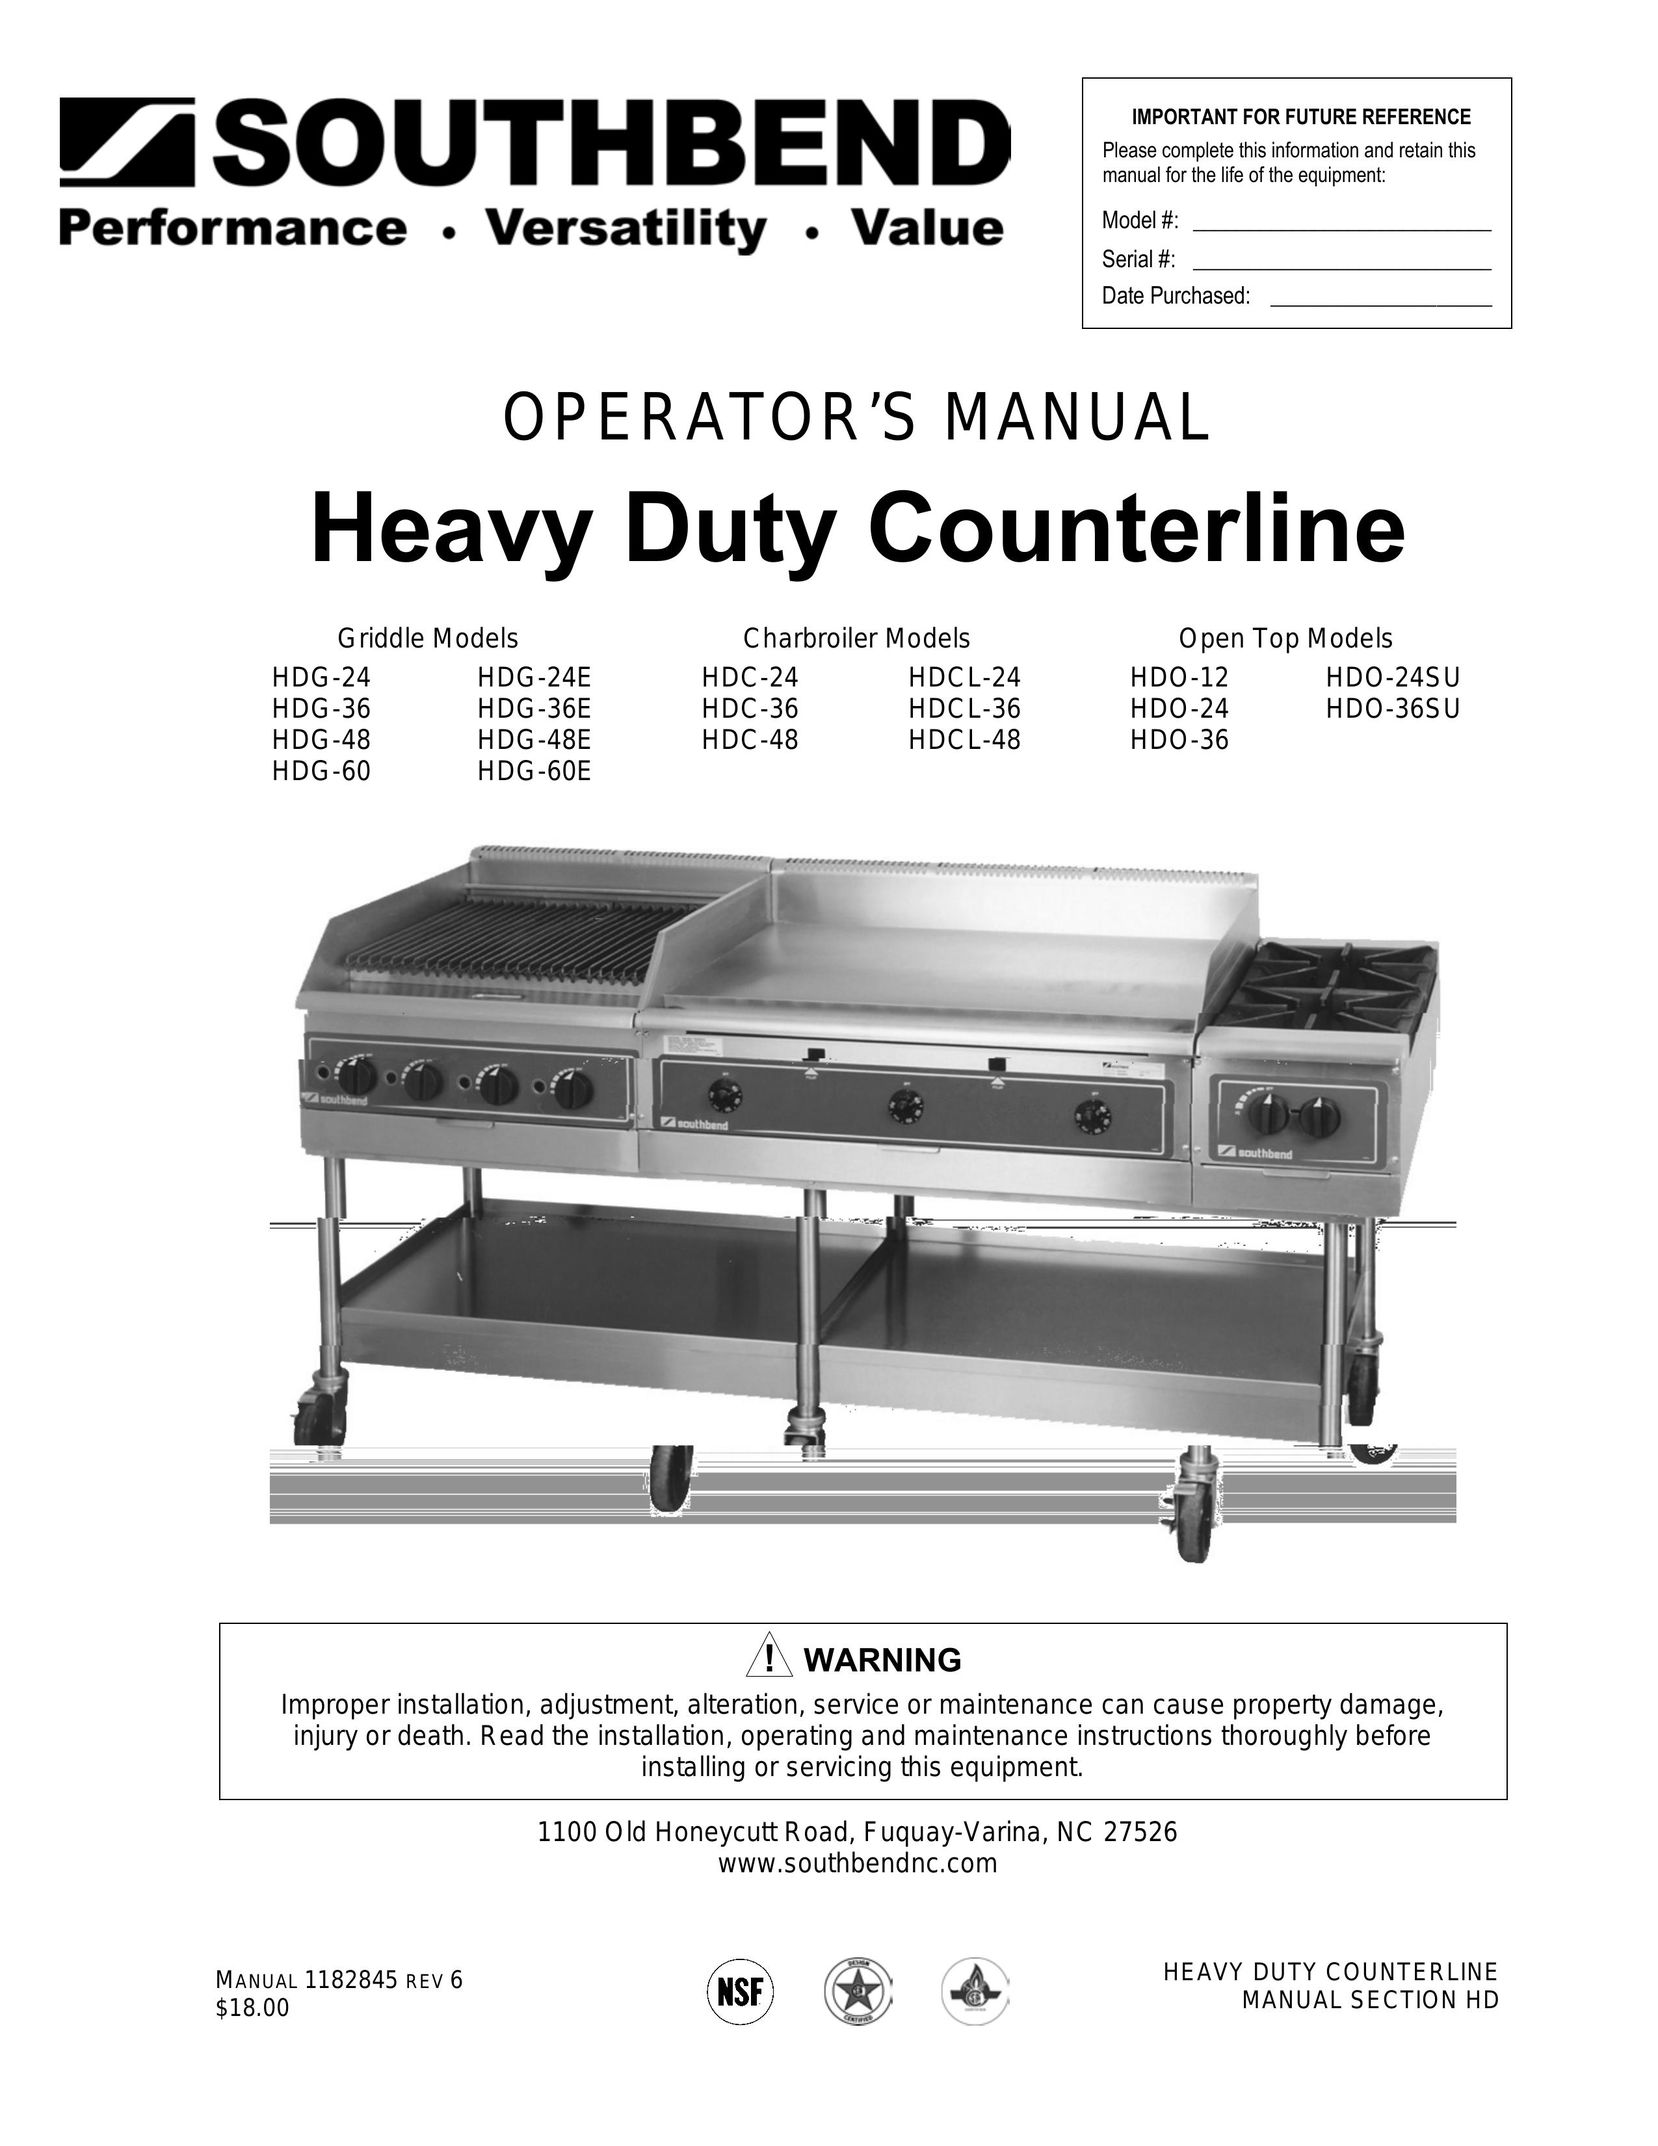 Southbend HDCL-36 Cooktop User Manual